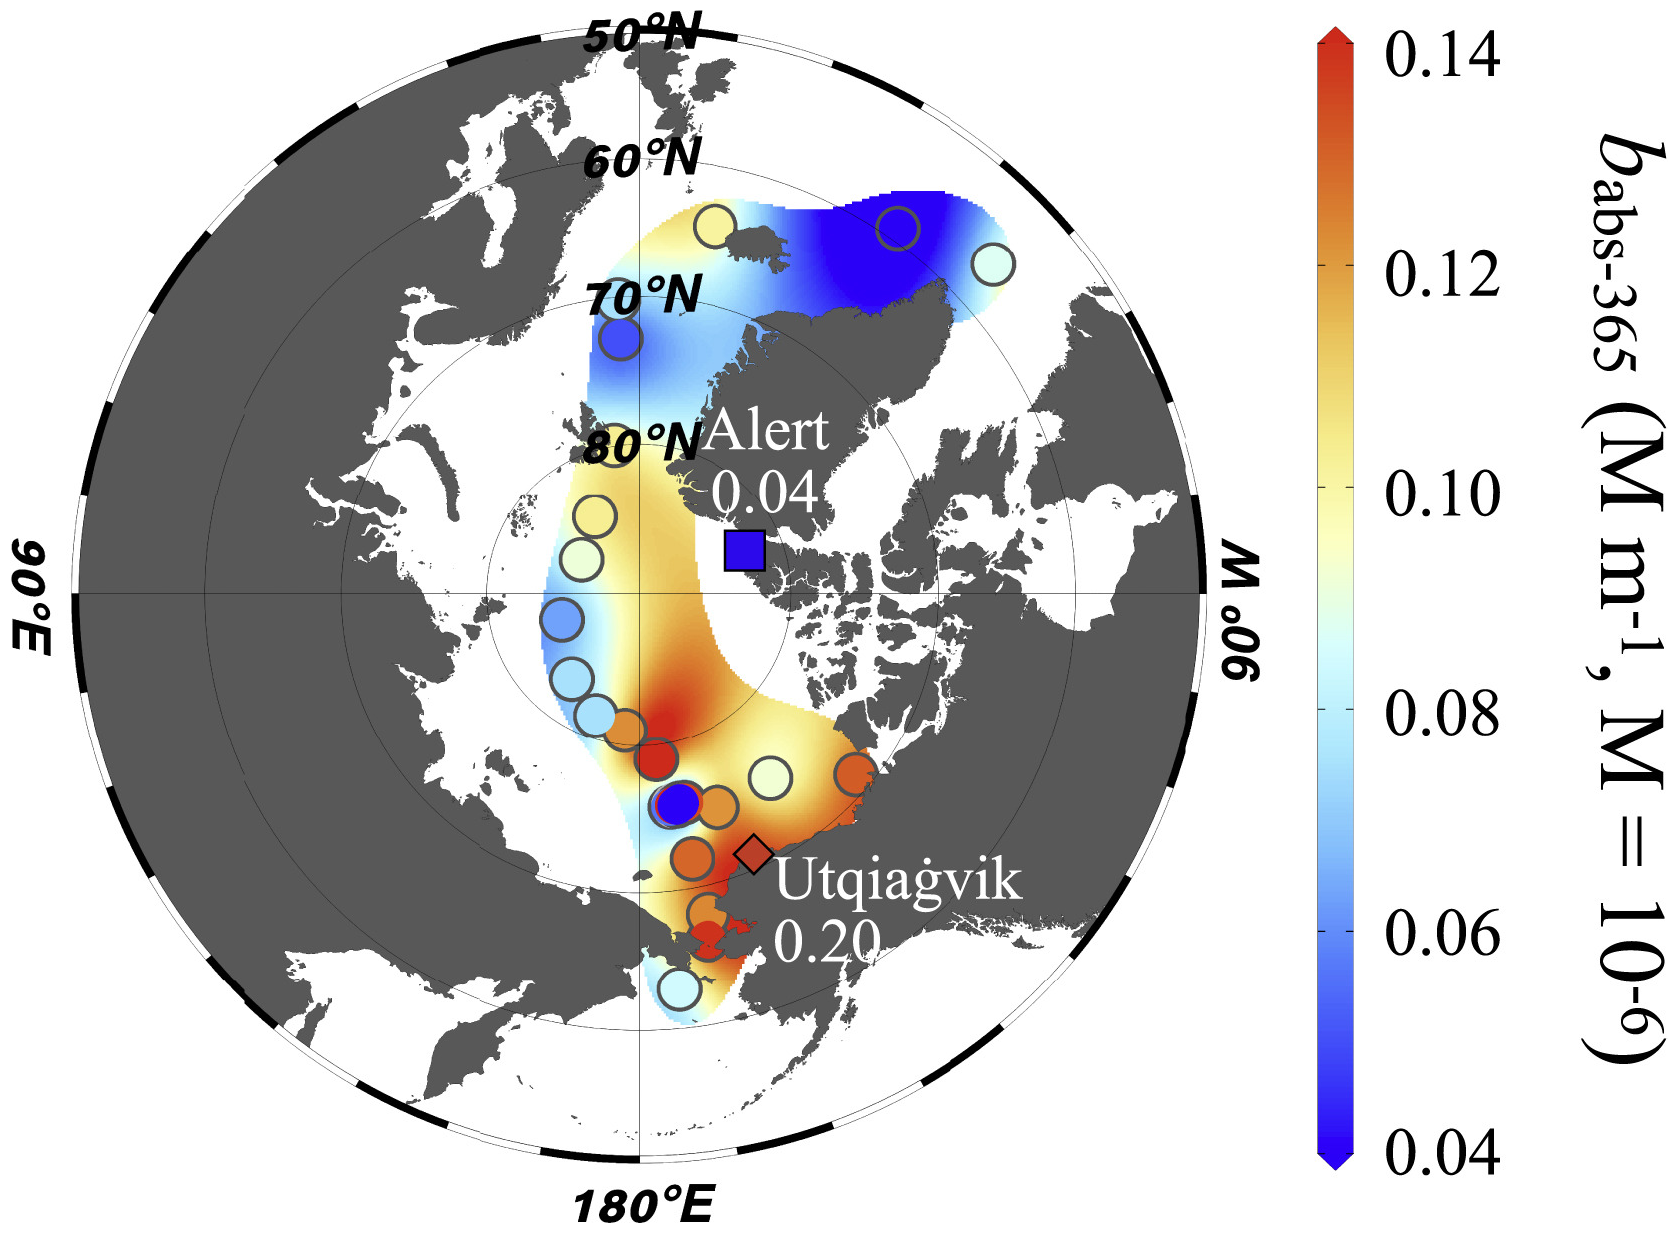 Geographical distribution of the measured mass light absorption coefficient (at 365 nm, babs-365, Mm−1, M = 10−6) of water-soluble brown carbon (BrC) in the circum-Arctic. The data dots are plotted at the middle of each sample. The shading was interpolated based on the measurements using the Data-Interpolating Variational Analysis method in the software Ocean Data View. The color range is set as the 10th and 90th percentiles of babs-365. The observed babs-365 of water-soluble BrC at Utqiaġvik (formerly Barrow) from August to September (2012) for PM10 samples (diamond) and at Alert from May to early June (1991) for total suspended samples (square) is also shown for comparison. Graphic: Yue, et al., 2022 / One Earth